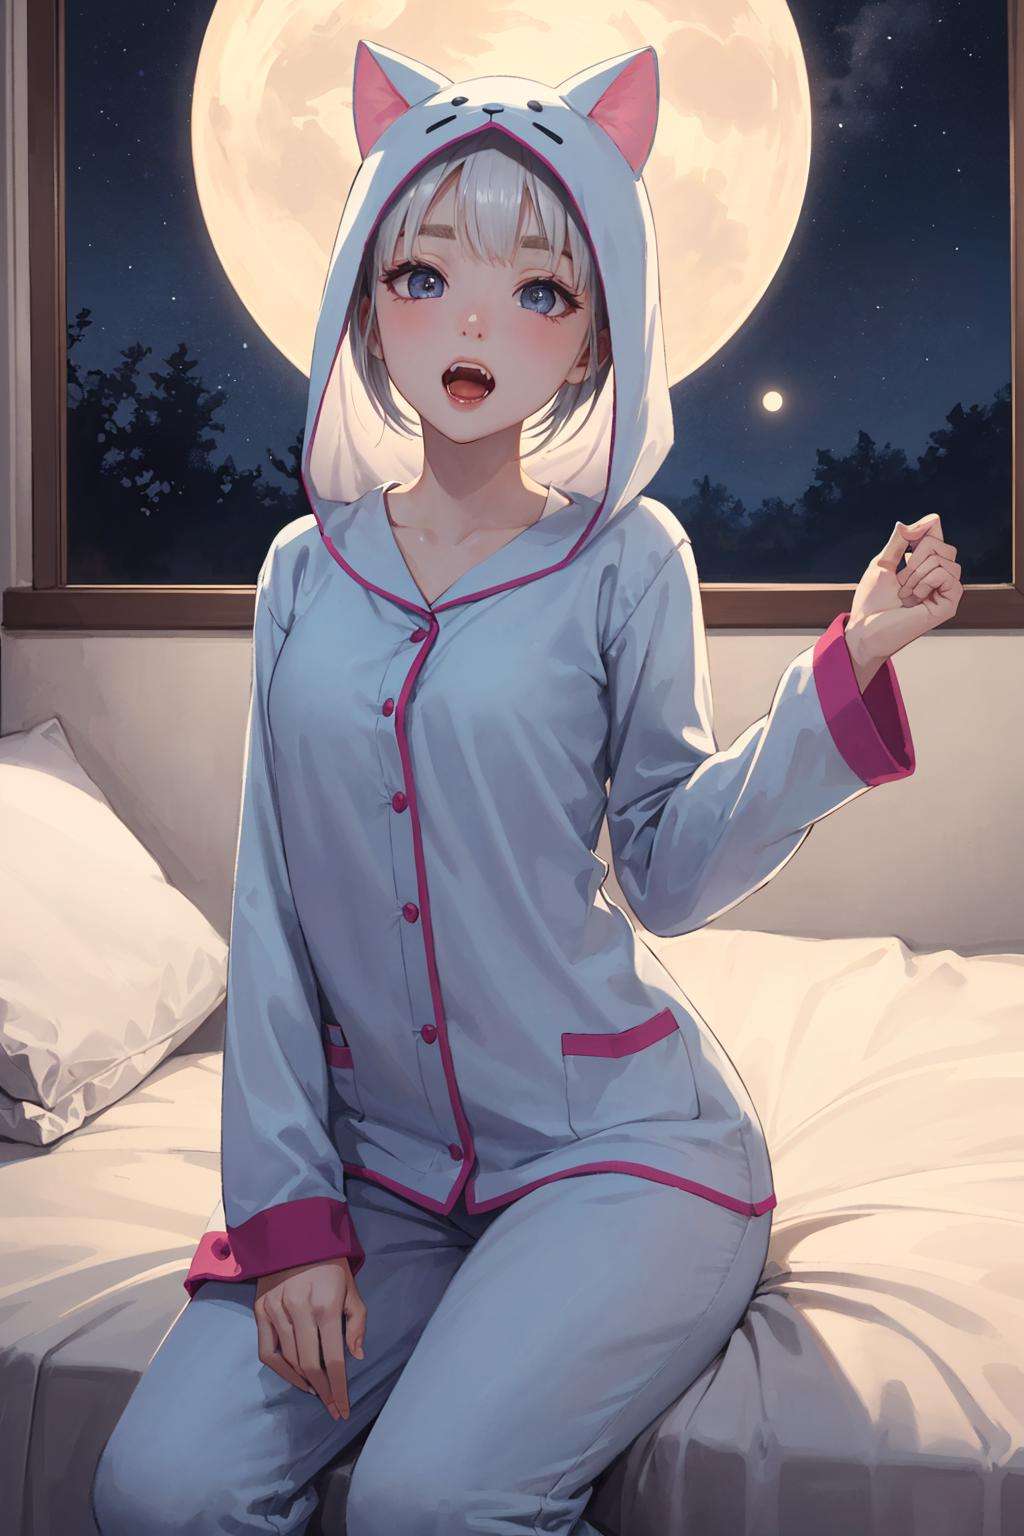 Original Character, Volumetric Lighting, Best Shadows, Shallow Depth of Field, Portrait Of Stunningly Beautiful Girl, Petite, Delicate Beautiful Attractive Face With Alluring Black Eyes, Half Closed Eyes, Thick Eyebrows, Yawning, Open Mouth, Cute Fangs, Lovely Small Breasts, Layered Medium White Hair, Blush Eyeshadow, Thick Eyelashes, Kigurumi Animal Pajamas, In The Dreamy Attic Bedroom, Sitting On Comfortable Bed, With Animal Pillows, Lovely Duvet Cover, Under The Circular Round Window, Fantastic Night Sky of Through Window, Moonlight, Milky Way, Starburst, (Highest Quality, Amazing Details:1.25), (Solo:1.3), Brilliant Colorful Paintings